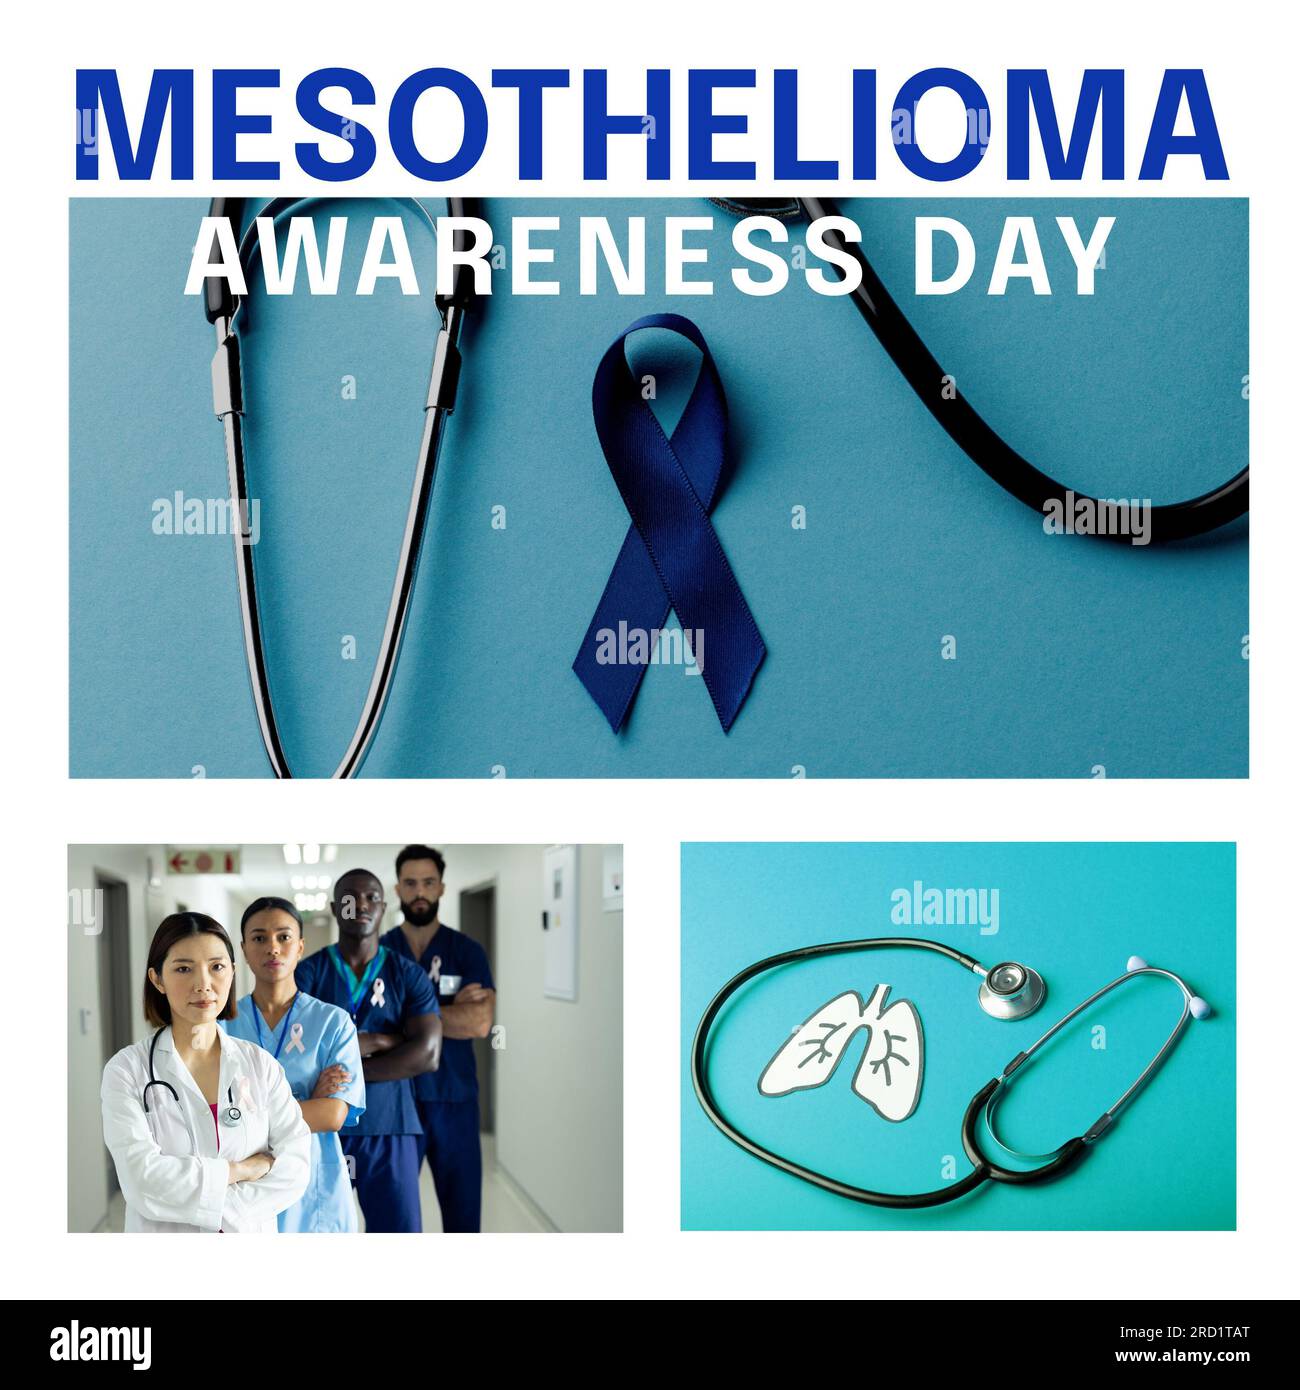 Mesothelioma awareness day text with blue ribbon, lungs, stethoscope and diverse medical team Stock Photo